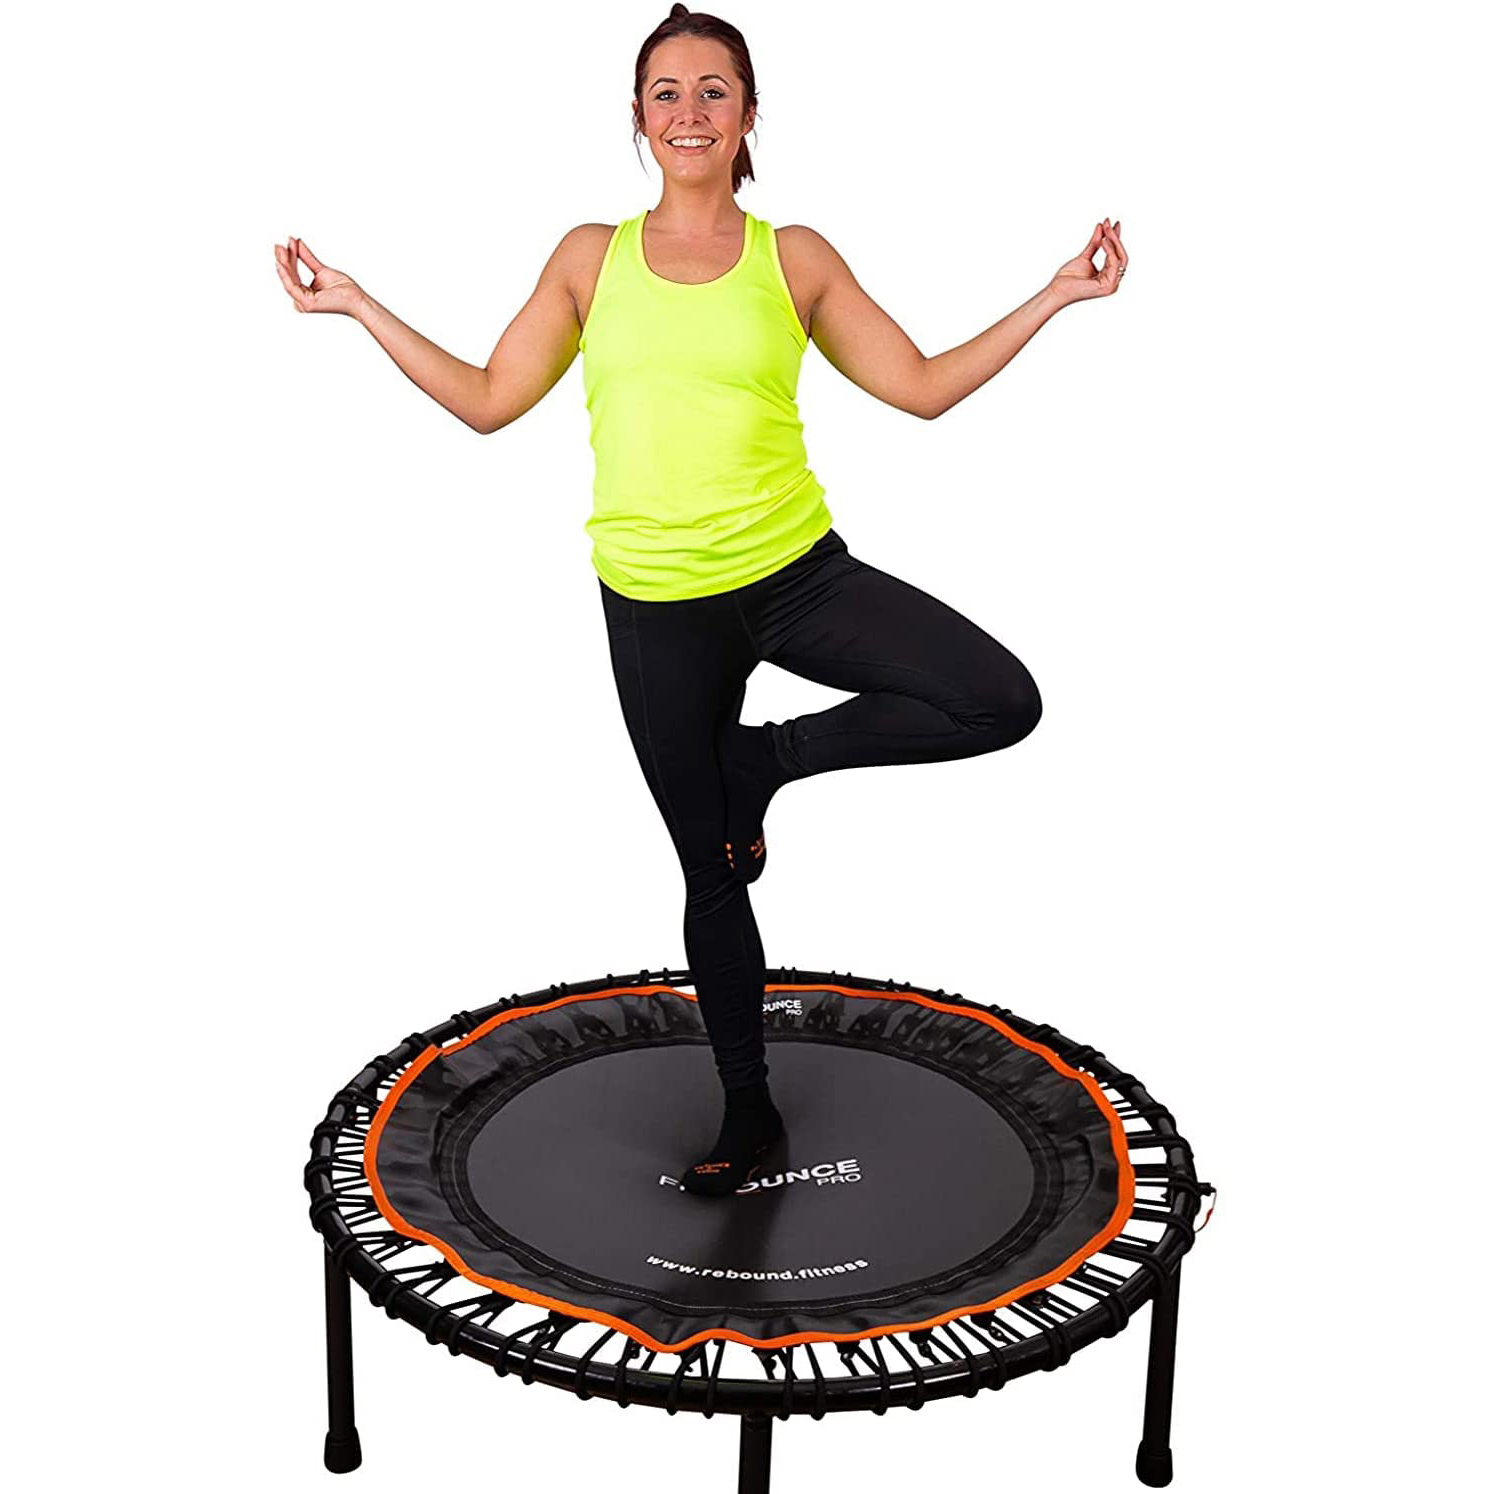 Max 220 lbs shaofu 50 Silent Rebounders Mini Trampolines Exercise Indoor with Adjustable Handrail for Adults Kids 